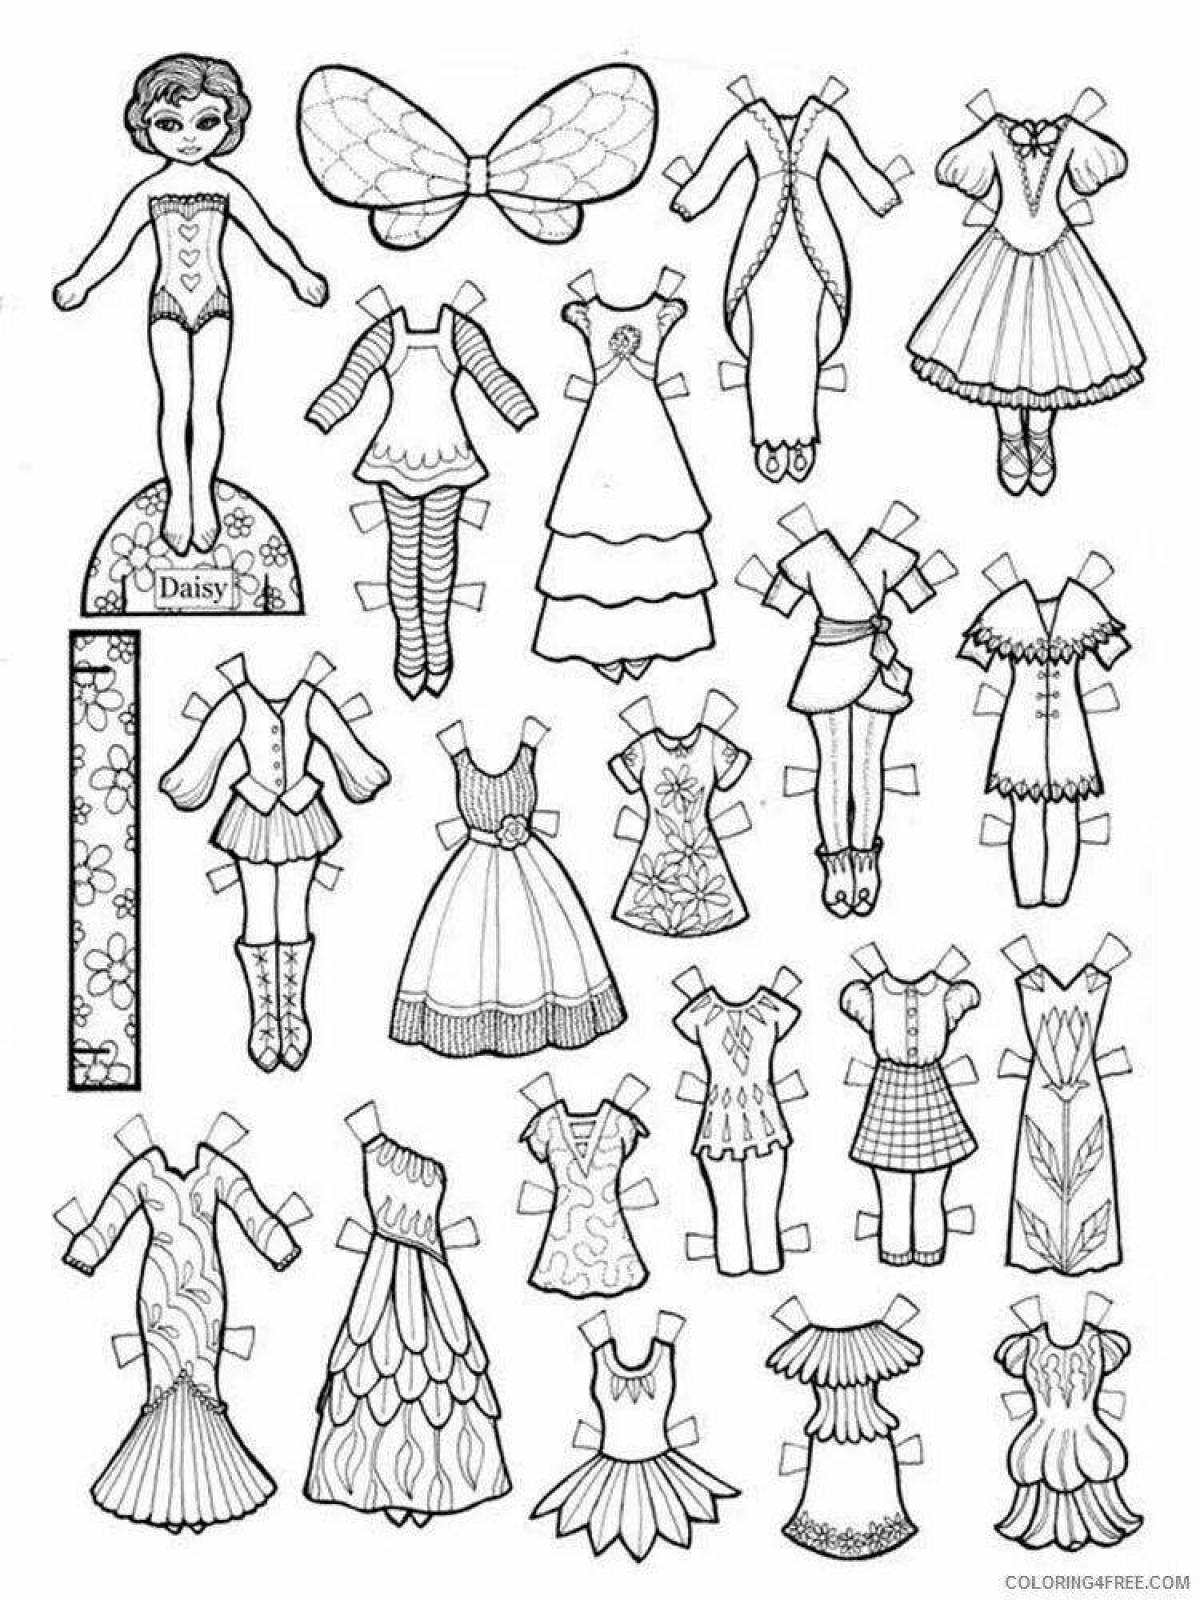 Sweet paper dolls with clothes for girl carving